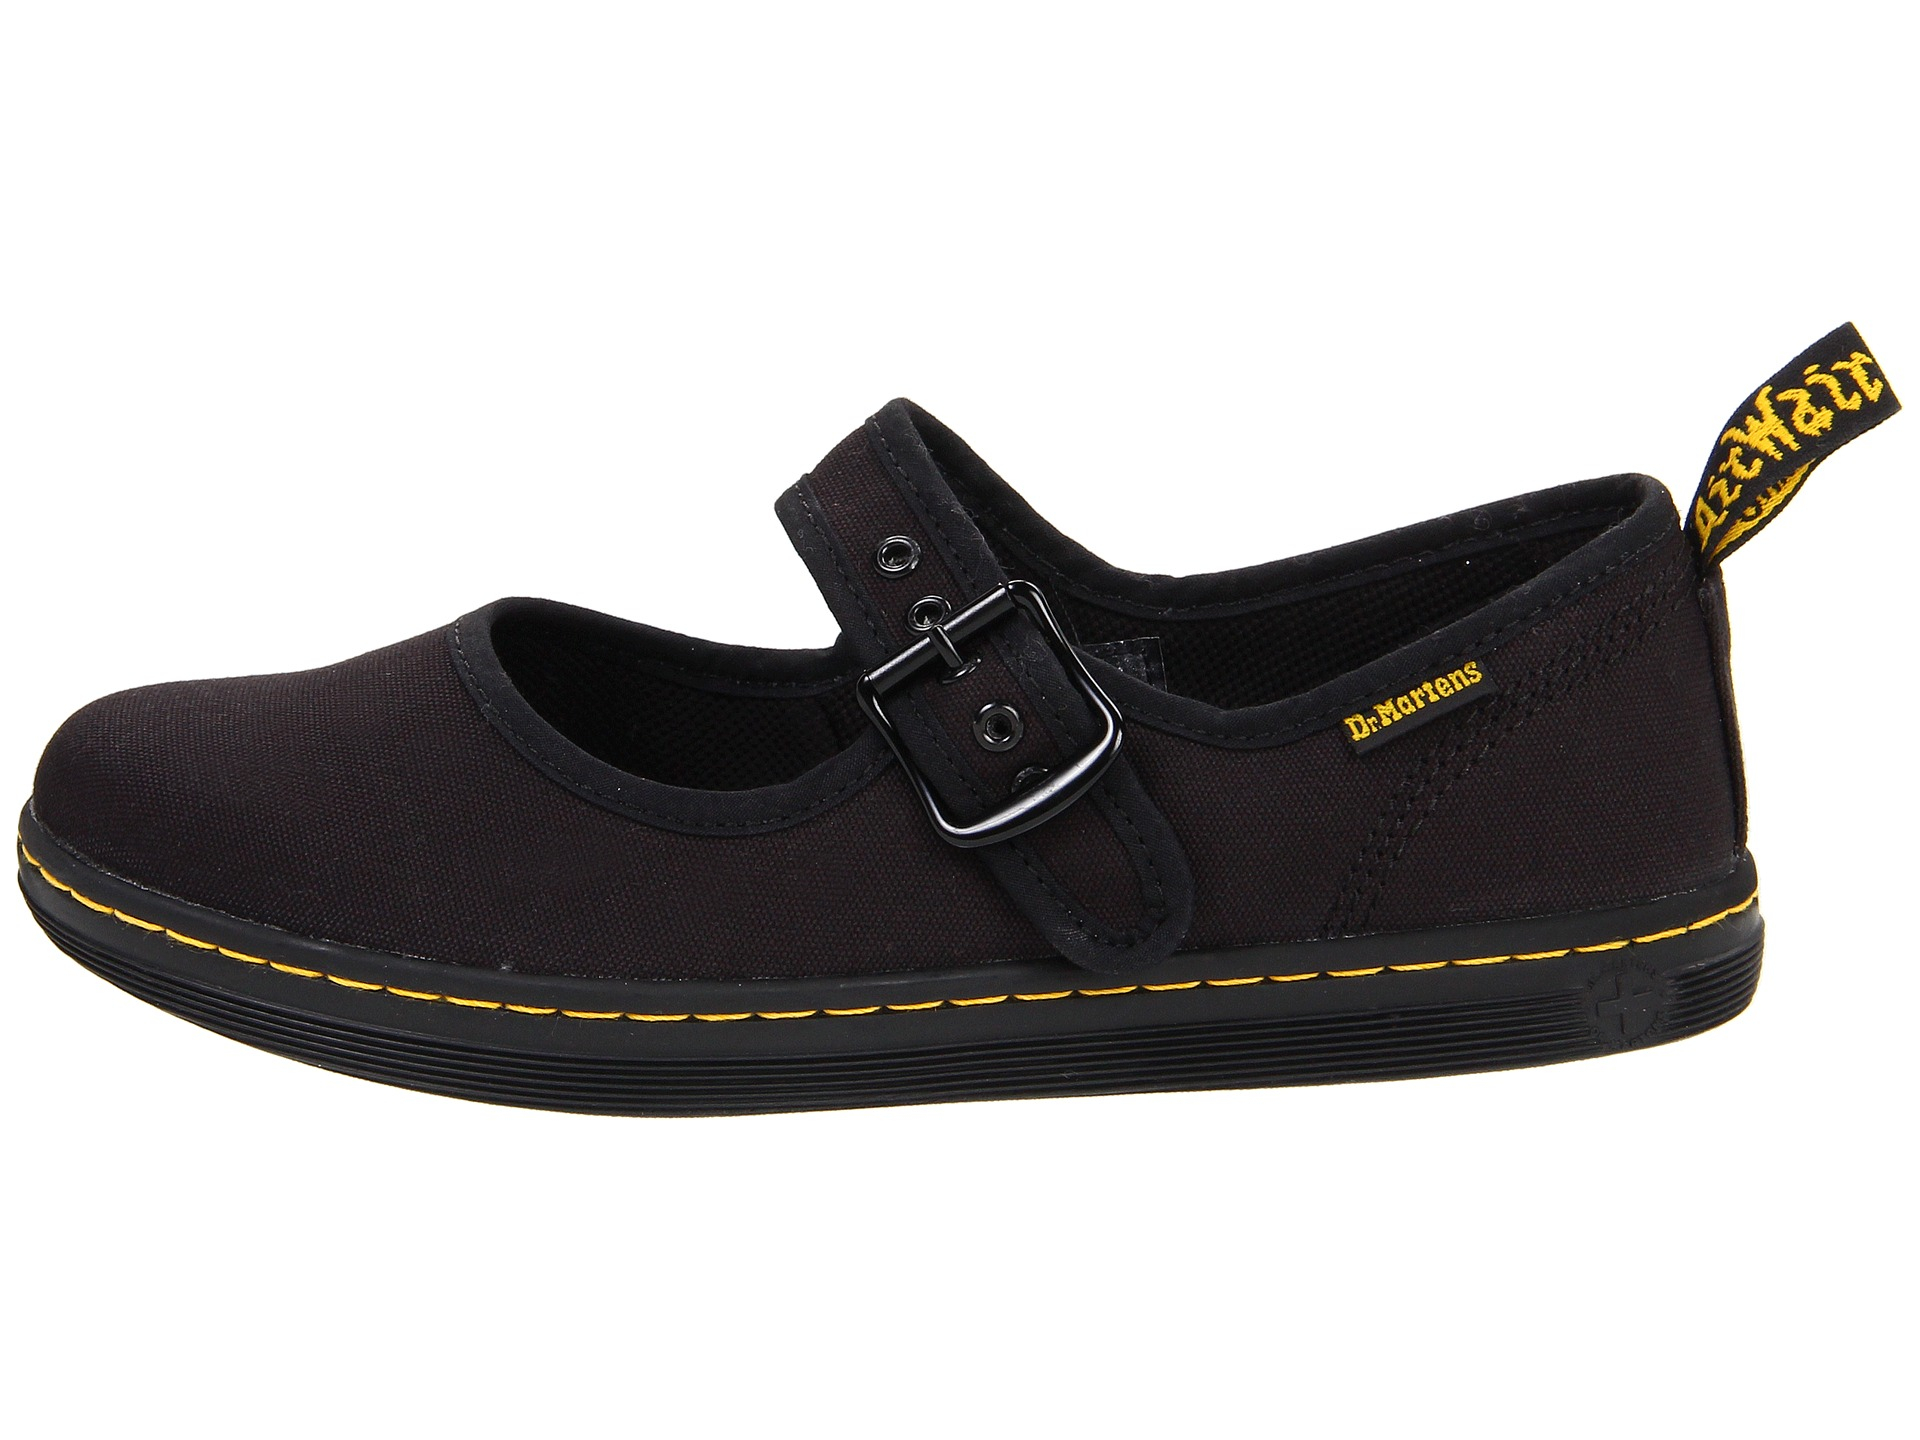 Dr. Martens Carnaby Mary Jane in Black 